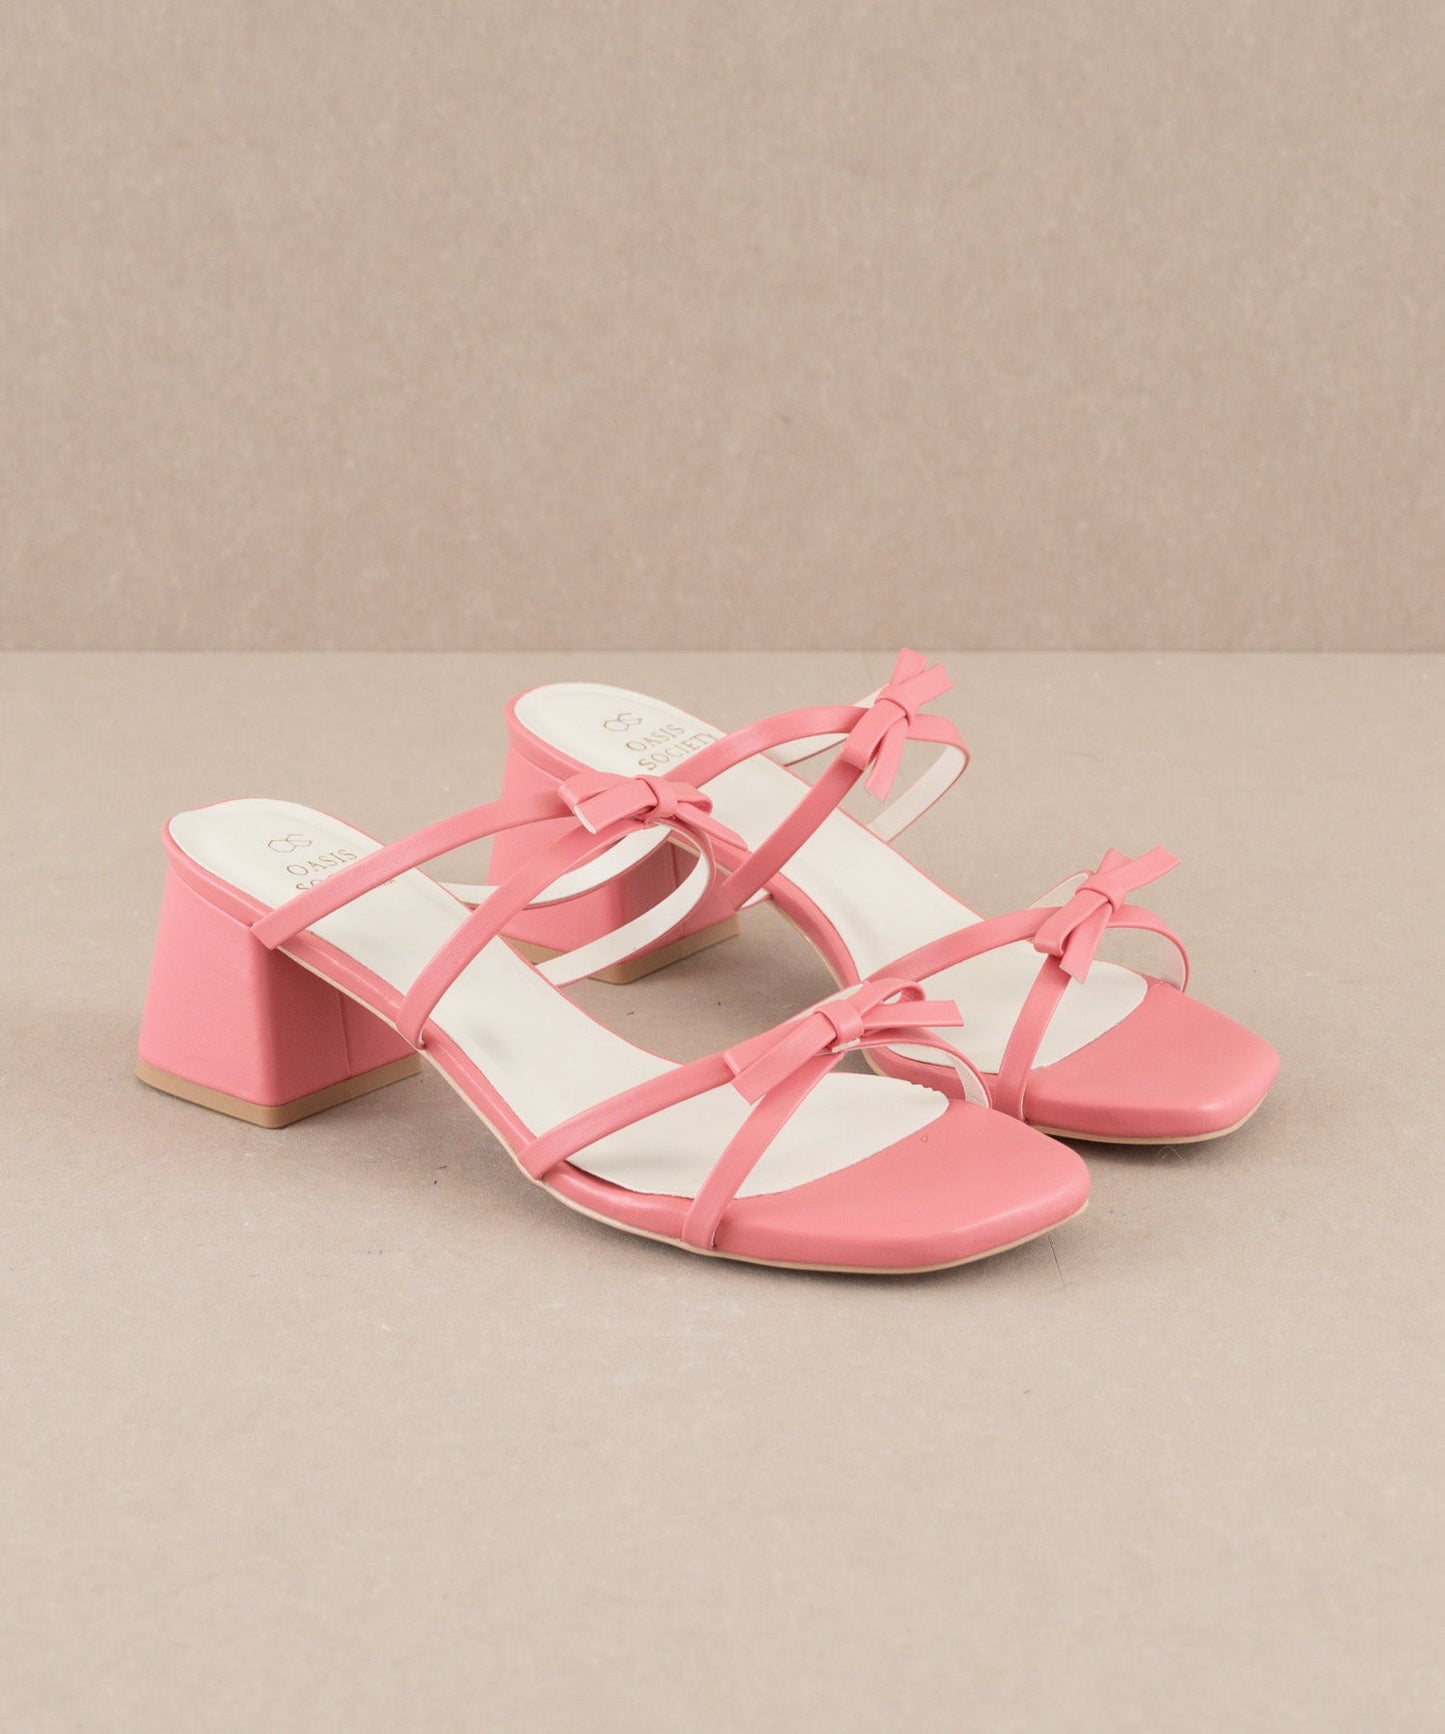 The Maci | Pink Strappy Heel with Bow Details